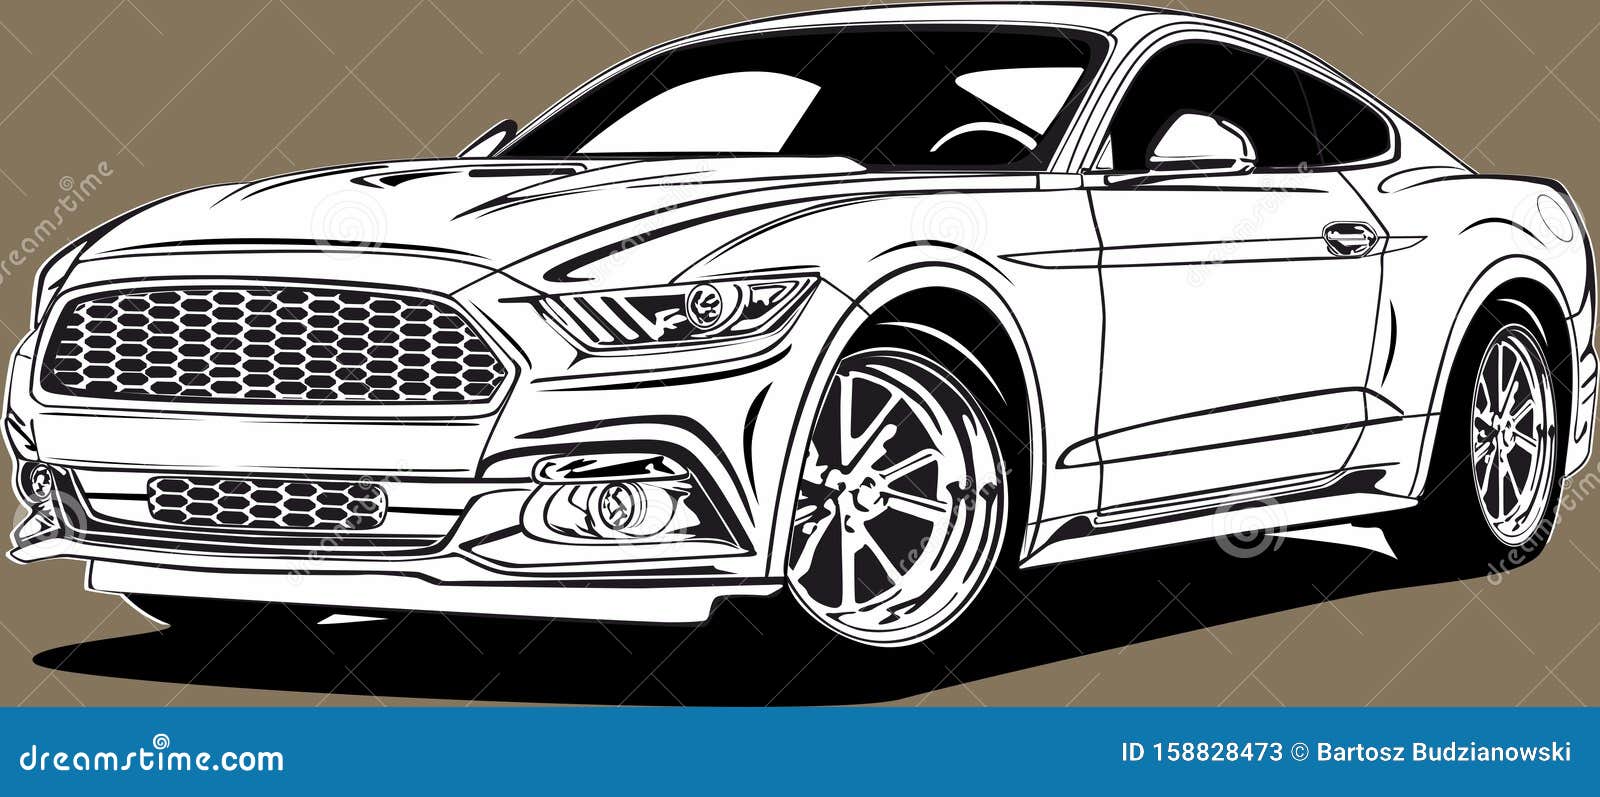 How to draw a car Ford Mustang GT  Drawing Ford Mustang stepbystep for  beginners  YouTube